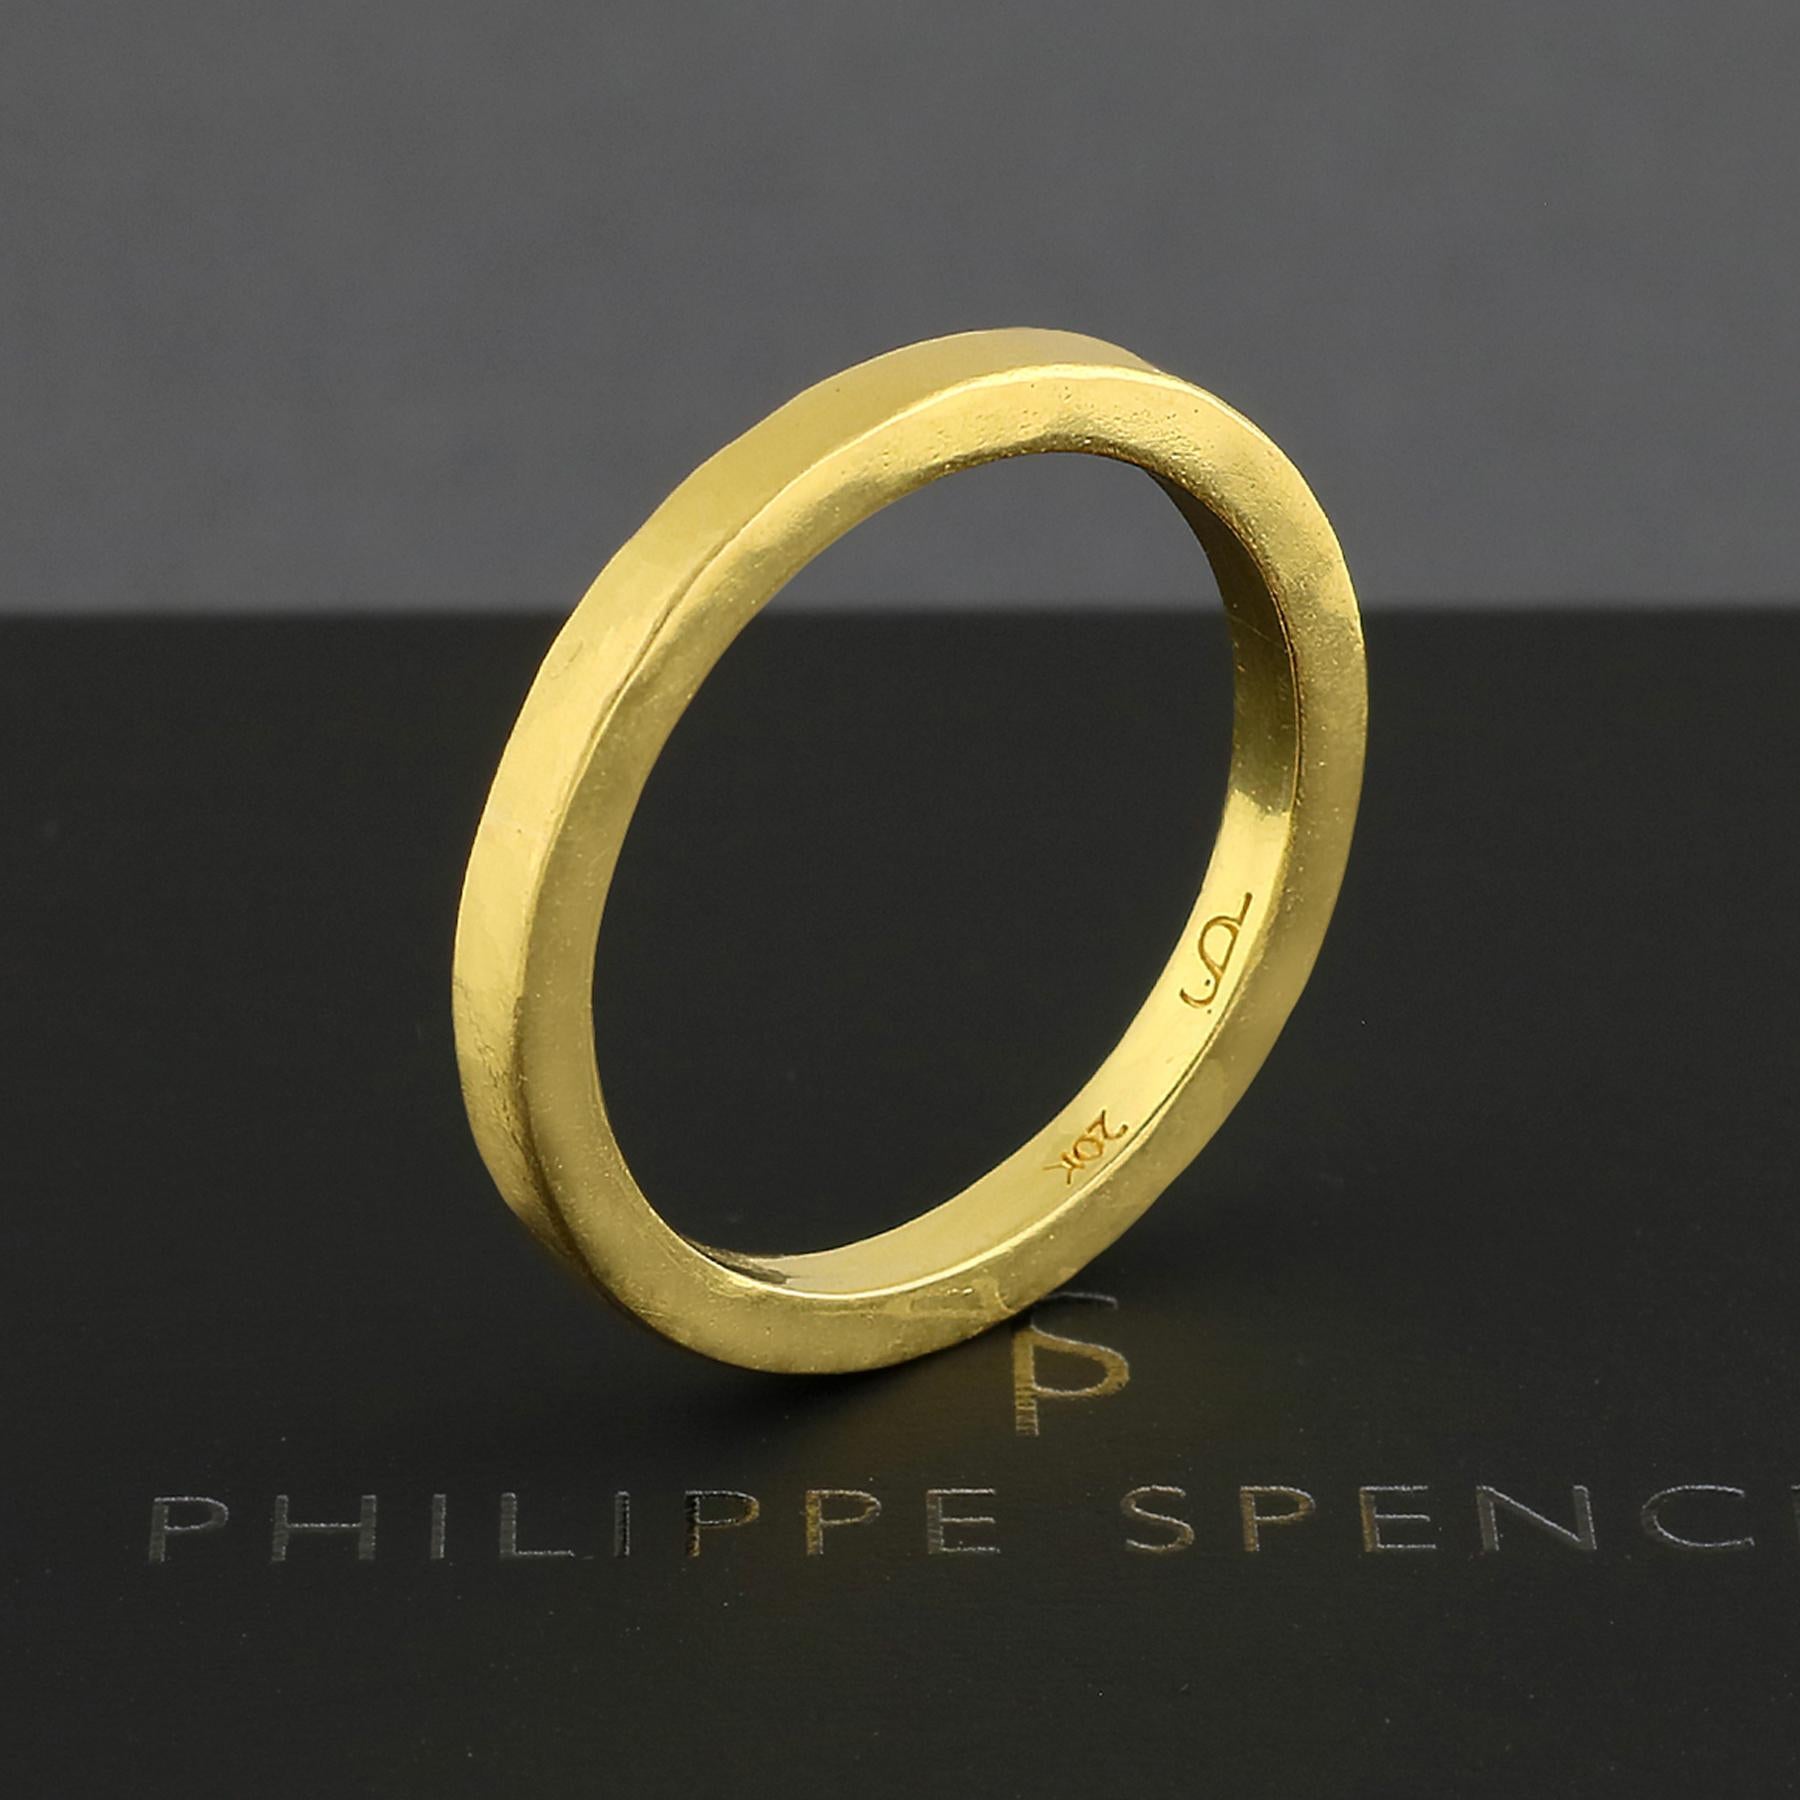 PHILIPPE-SPENCER - 2.5 X 2.25mm Solid 20K Gold Hand-Forged Band with Hammered Finish. Heavy Matte Exterior, Mirror Polished Interior.  Each is a unique one-of-a-kind work of art. This PHILIPPE SPENCER solid 20K Gold Hand Made ring is extremely